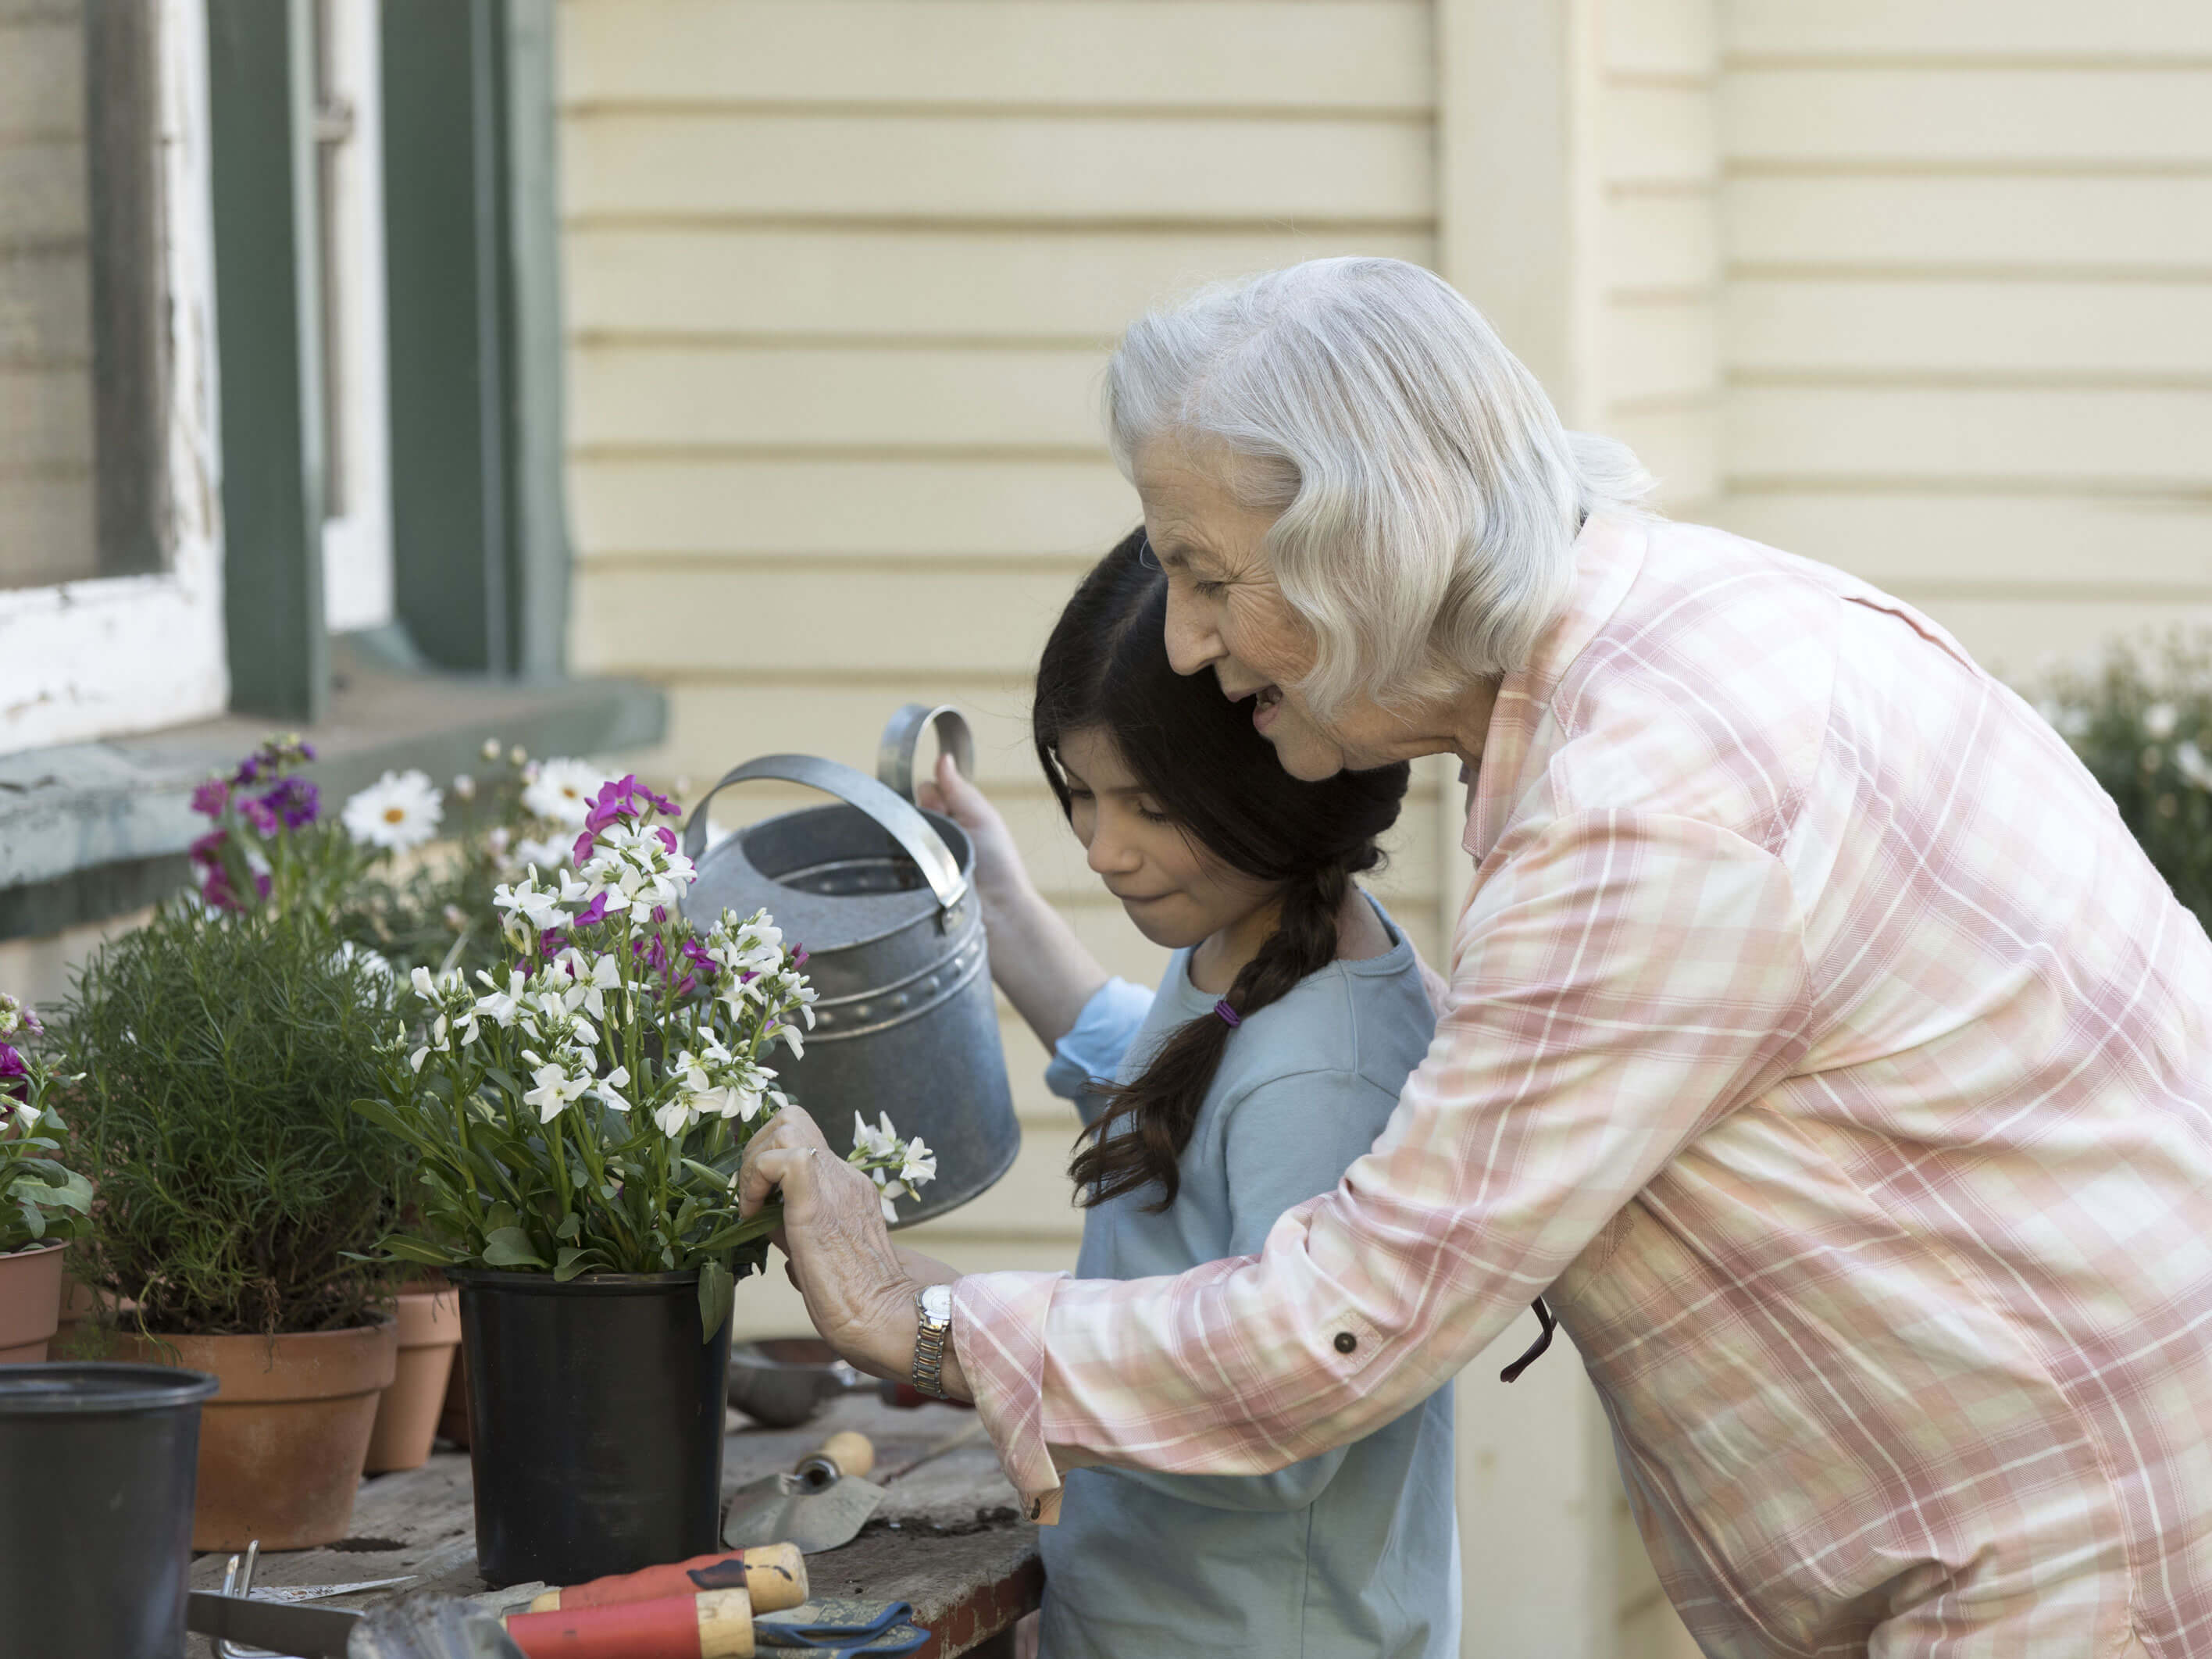 A senior woman helps her young granddaughter water a pot of flowers sitting on a table outside of her home.